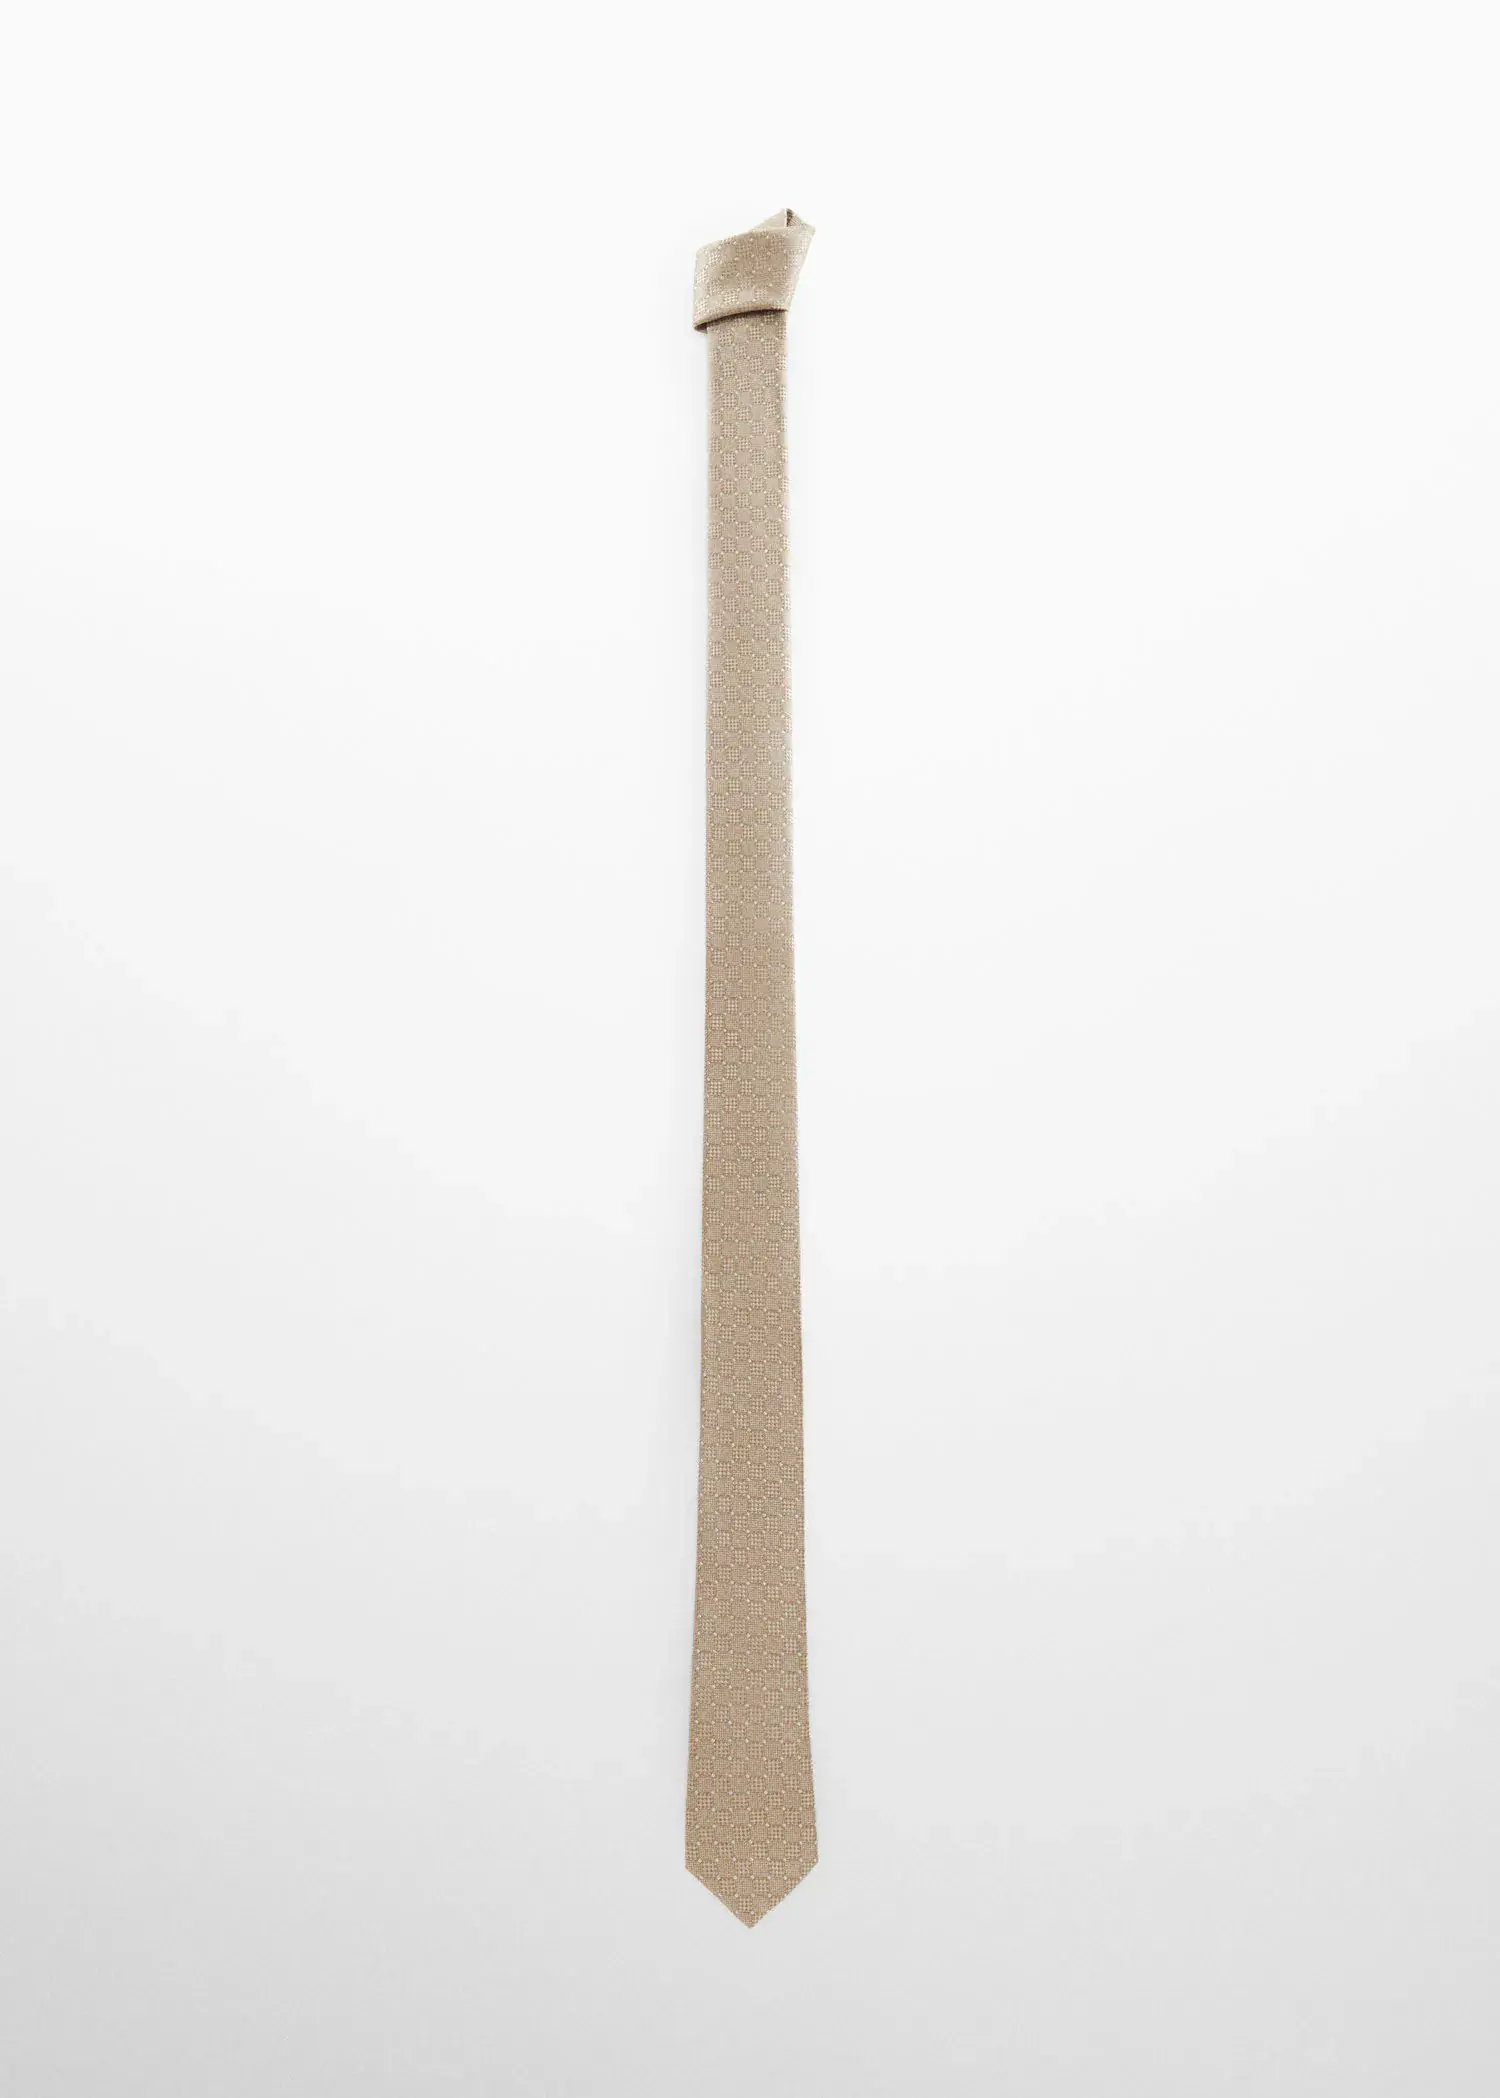 Mango Geometric-structure tie. a wooden pole with a white background. 